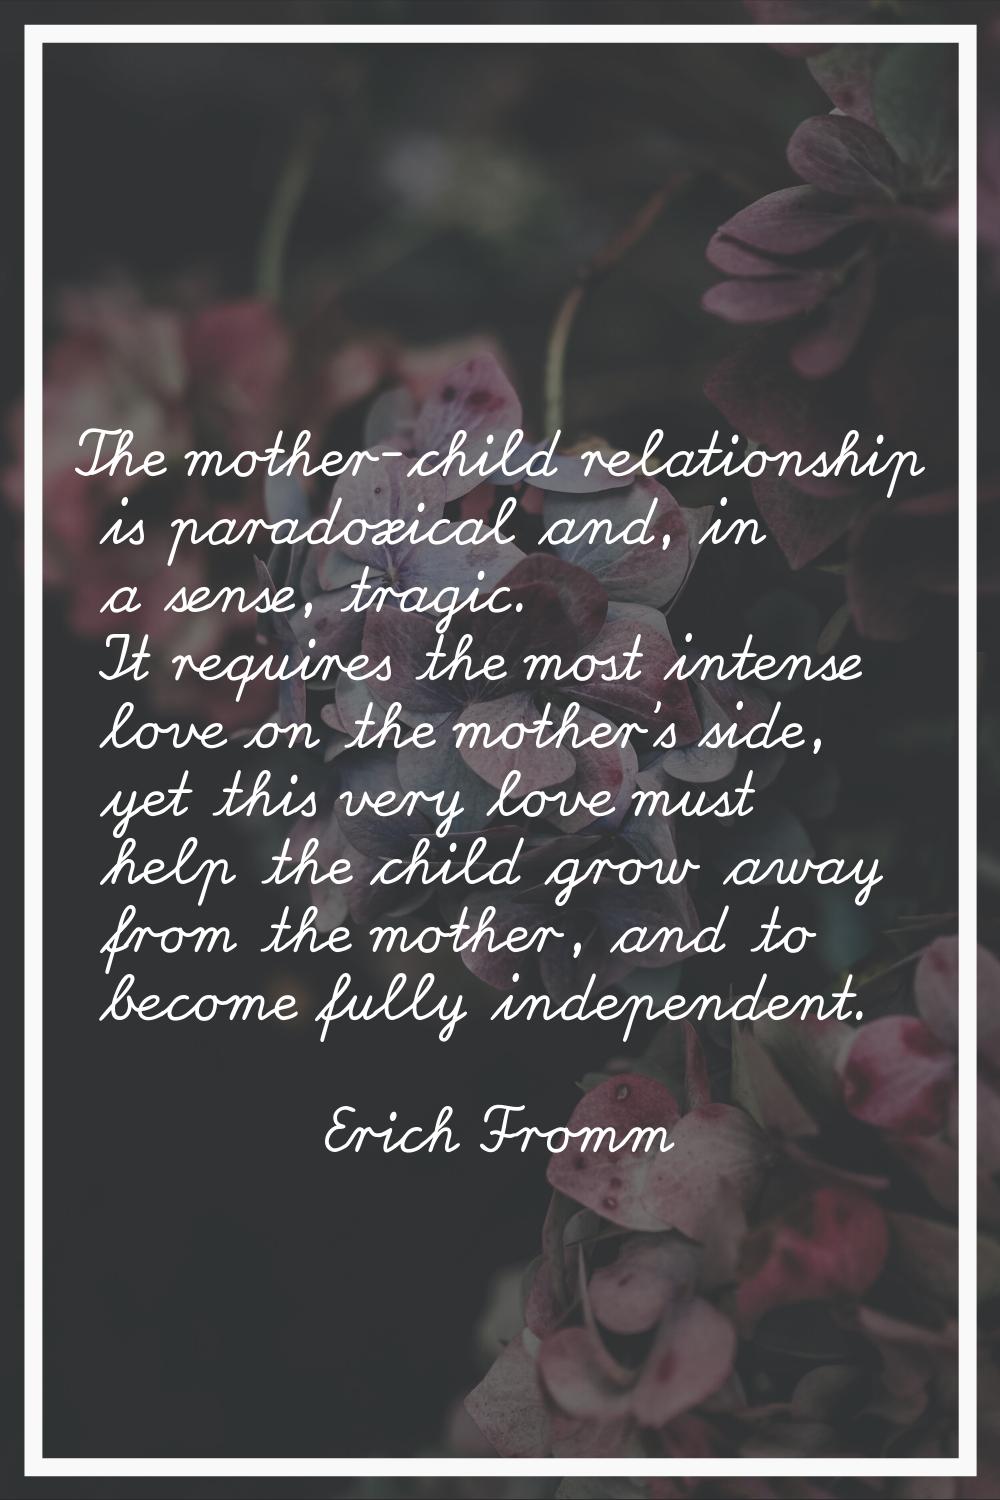 The mother-child relationship is paradoxical and, in a sense, tragic. It requires the most intense 